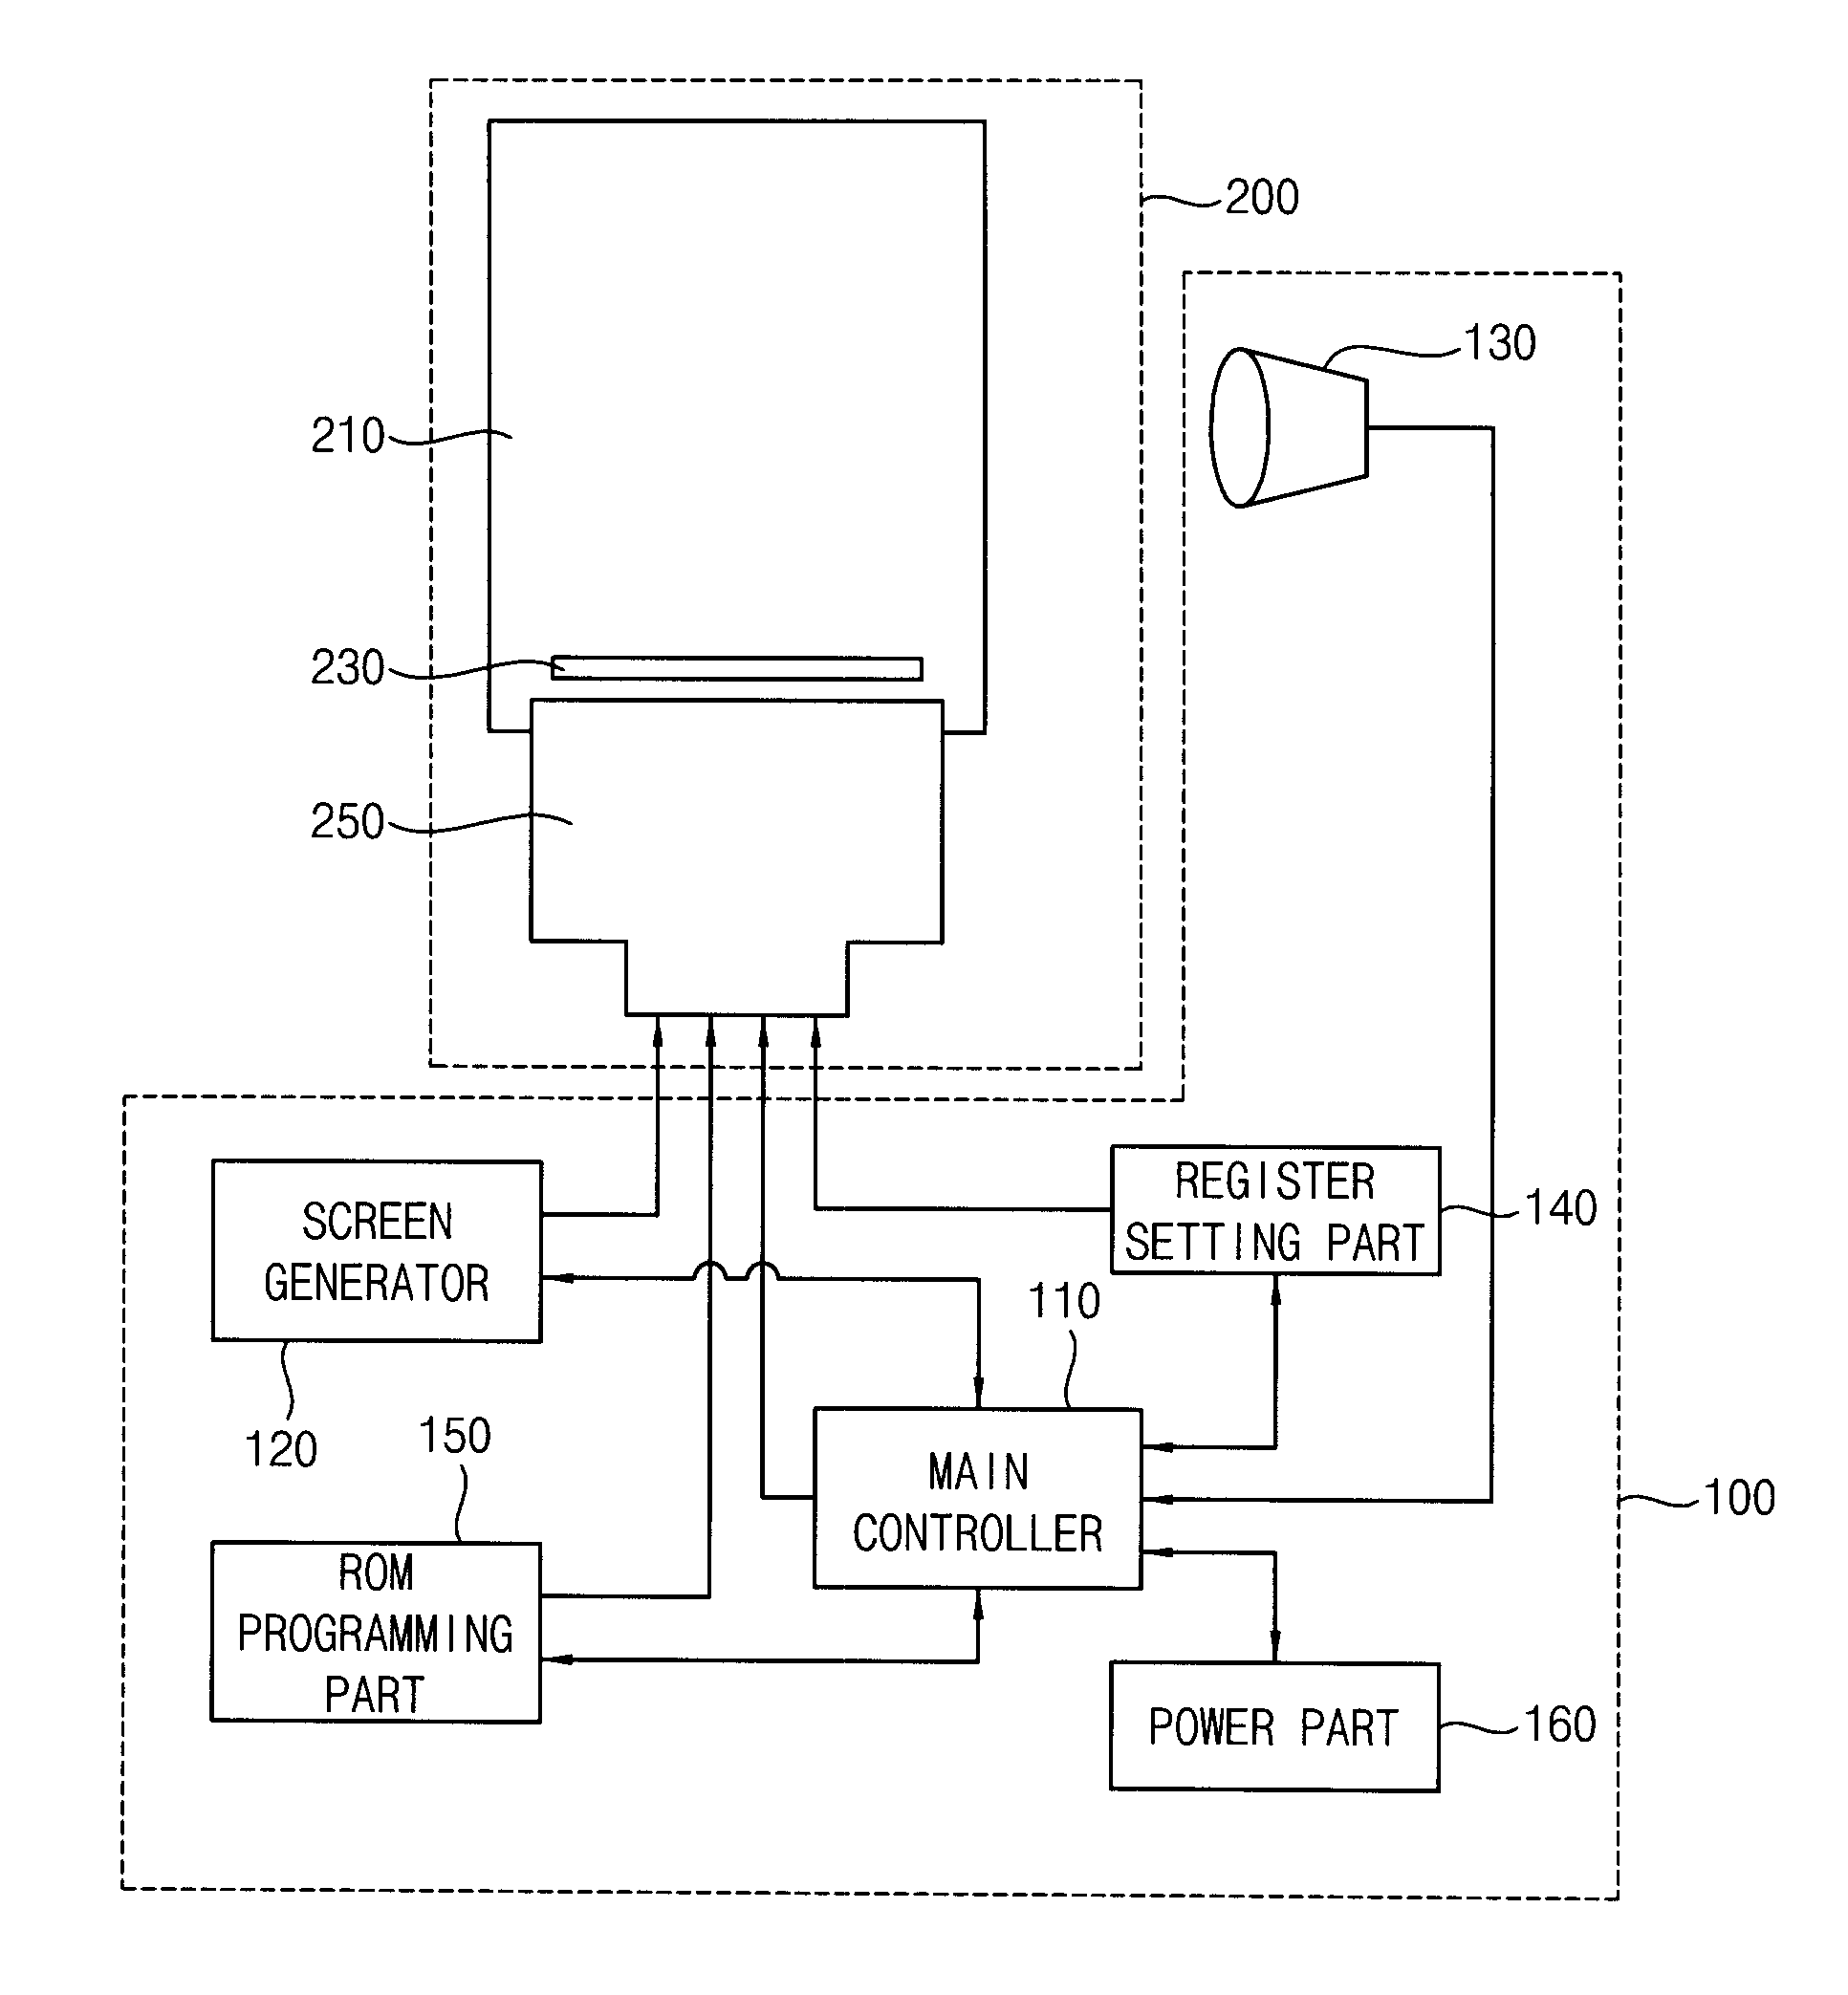 Apparatus and method for setting a common voltage